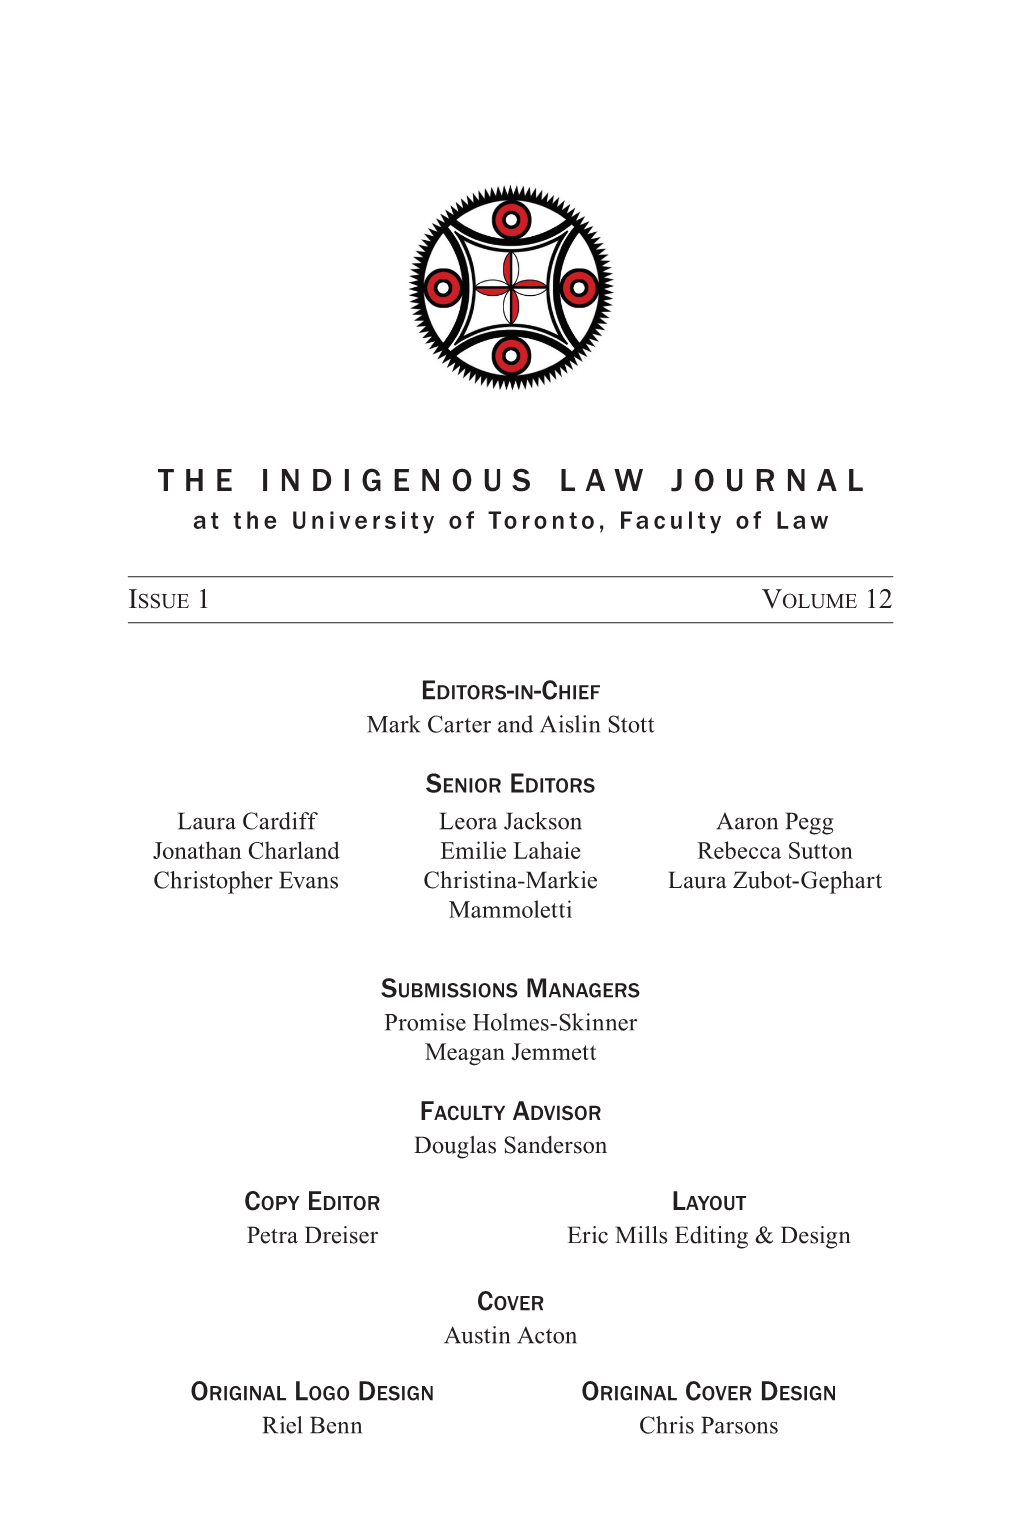 THE INDIGENOUS LAW JOURNAL at the University of Toronto, Faculty of Law